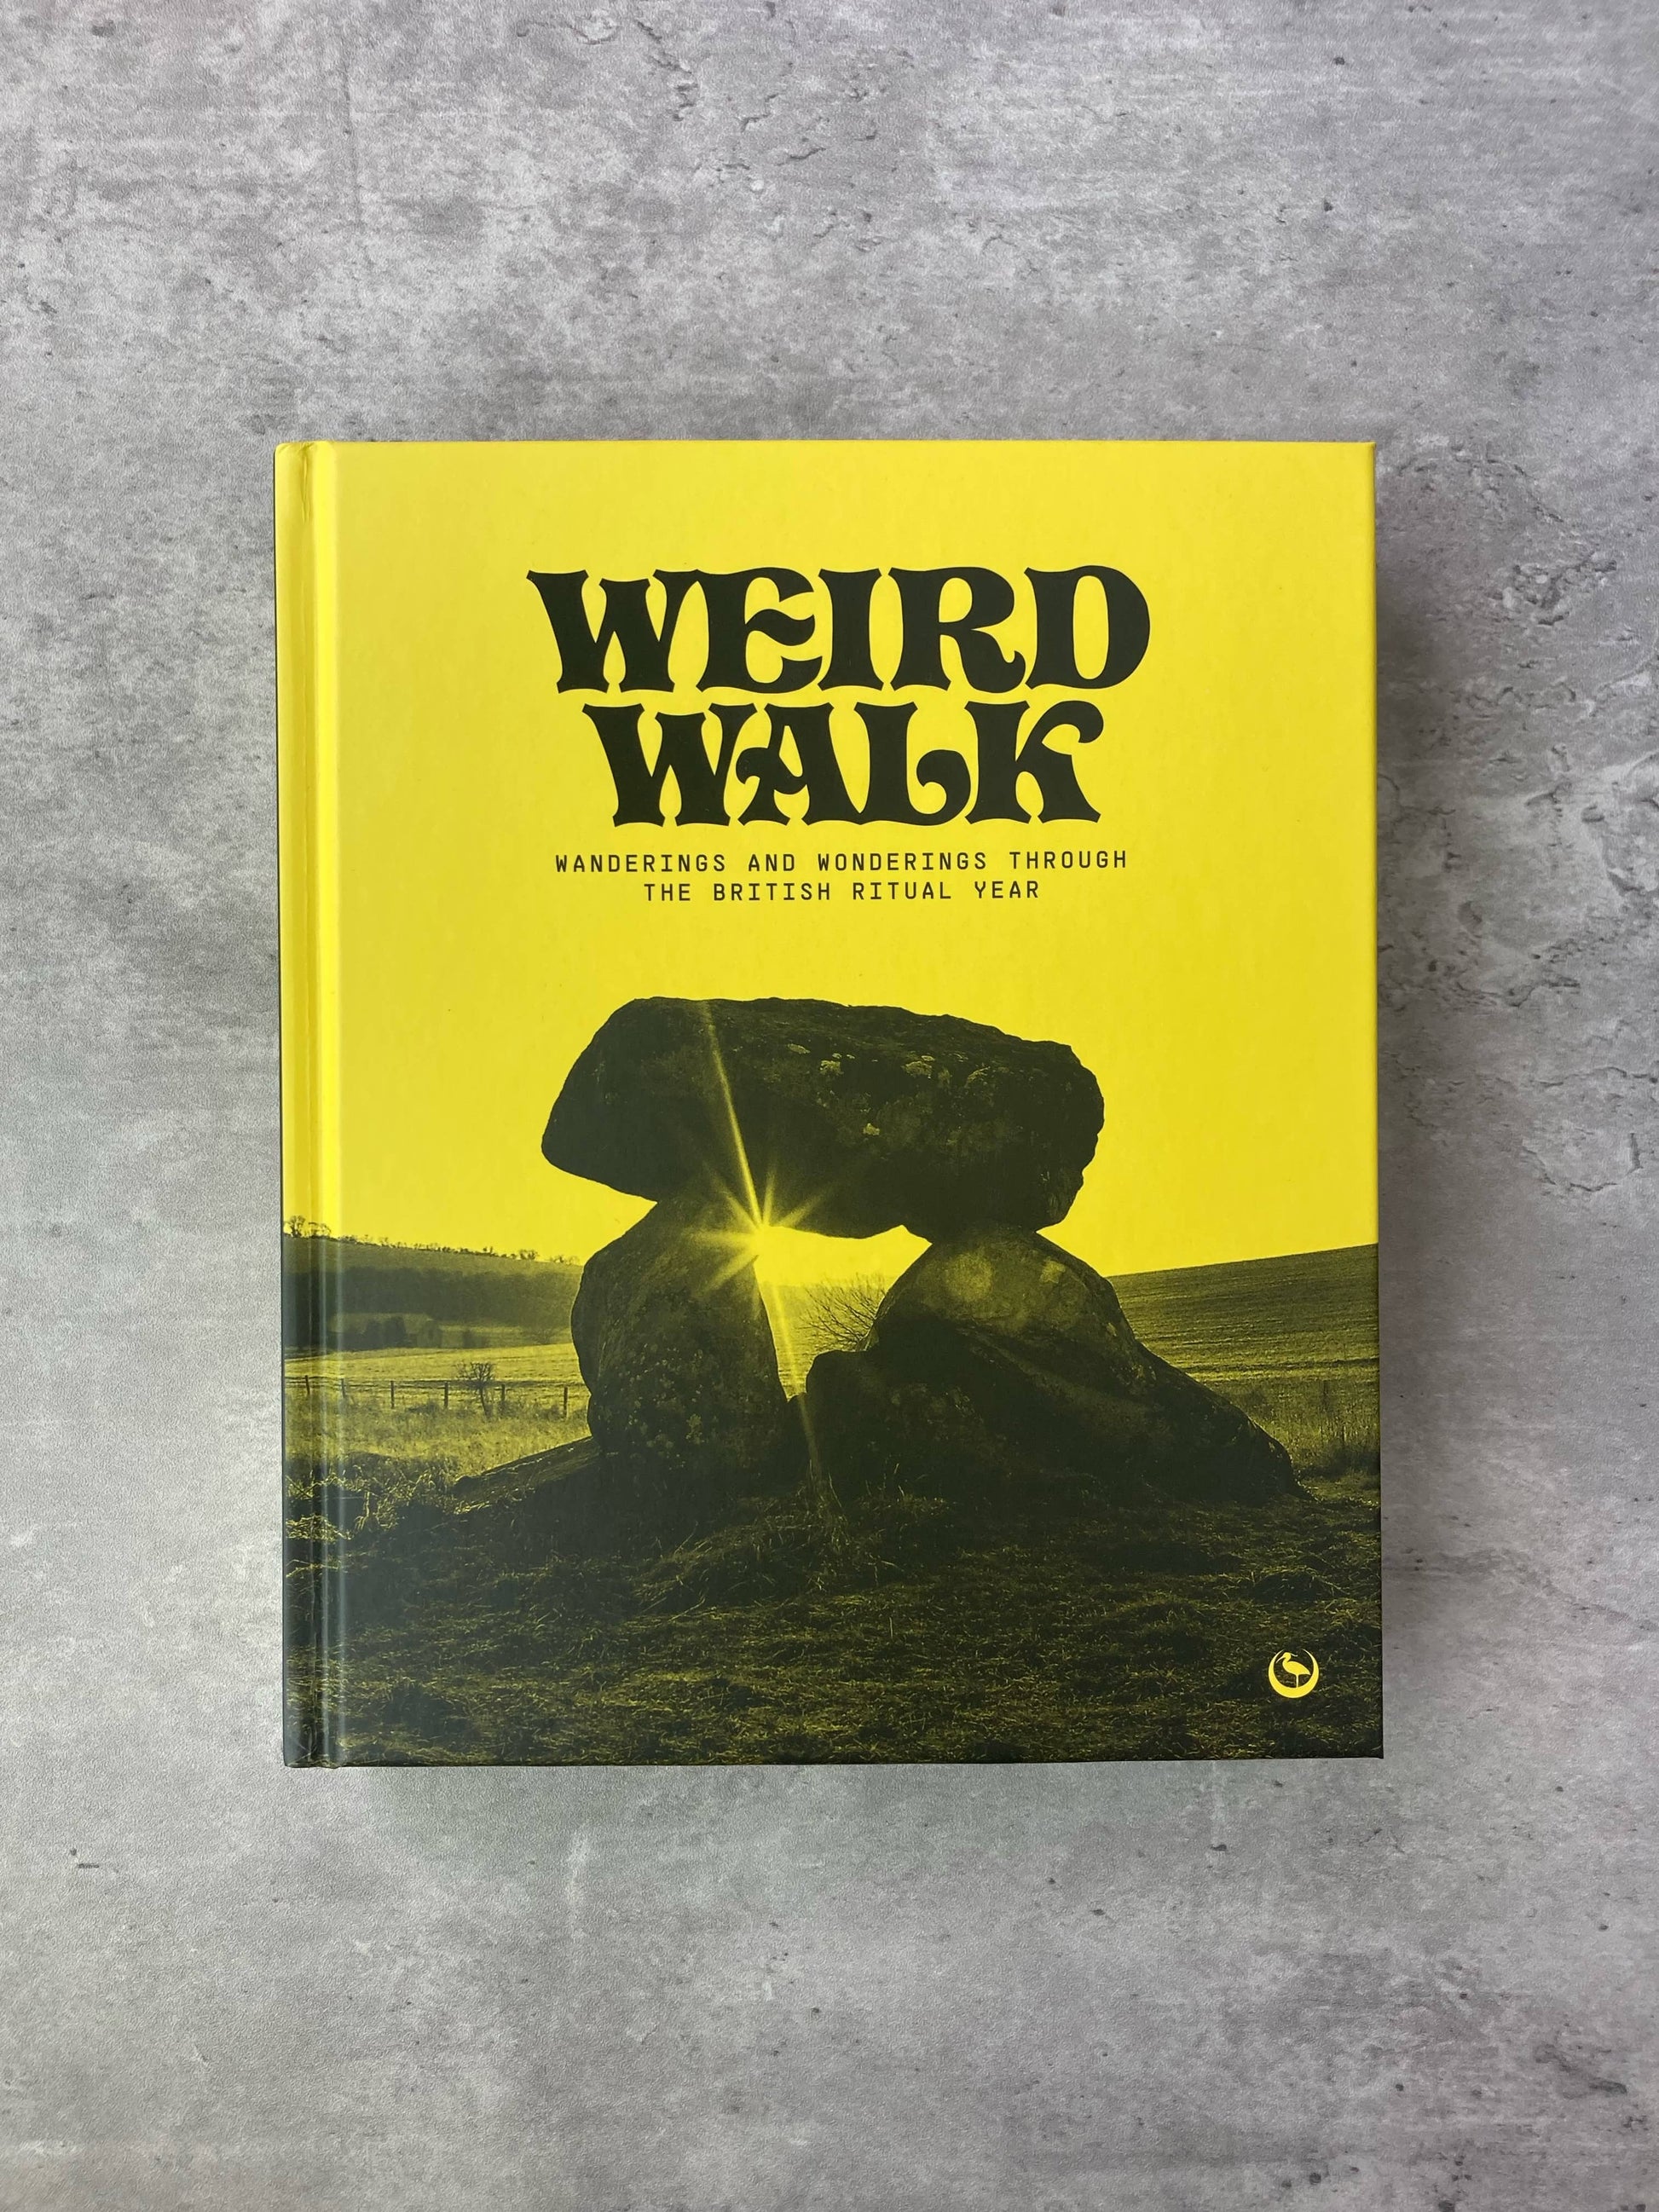 Weird Walk book. Shop all new and used books online at The Stone Circle, the only online bookstore in Los Angeles, California.